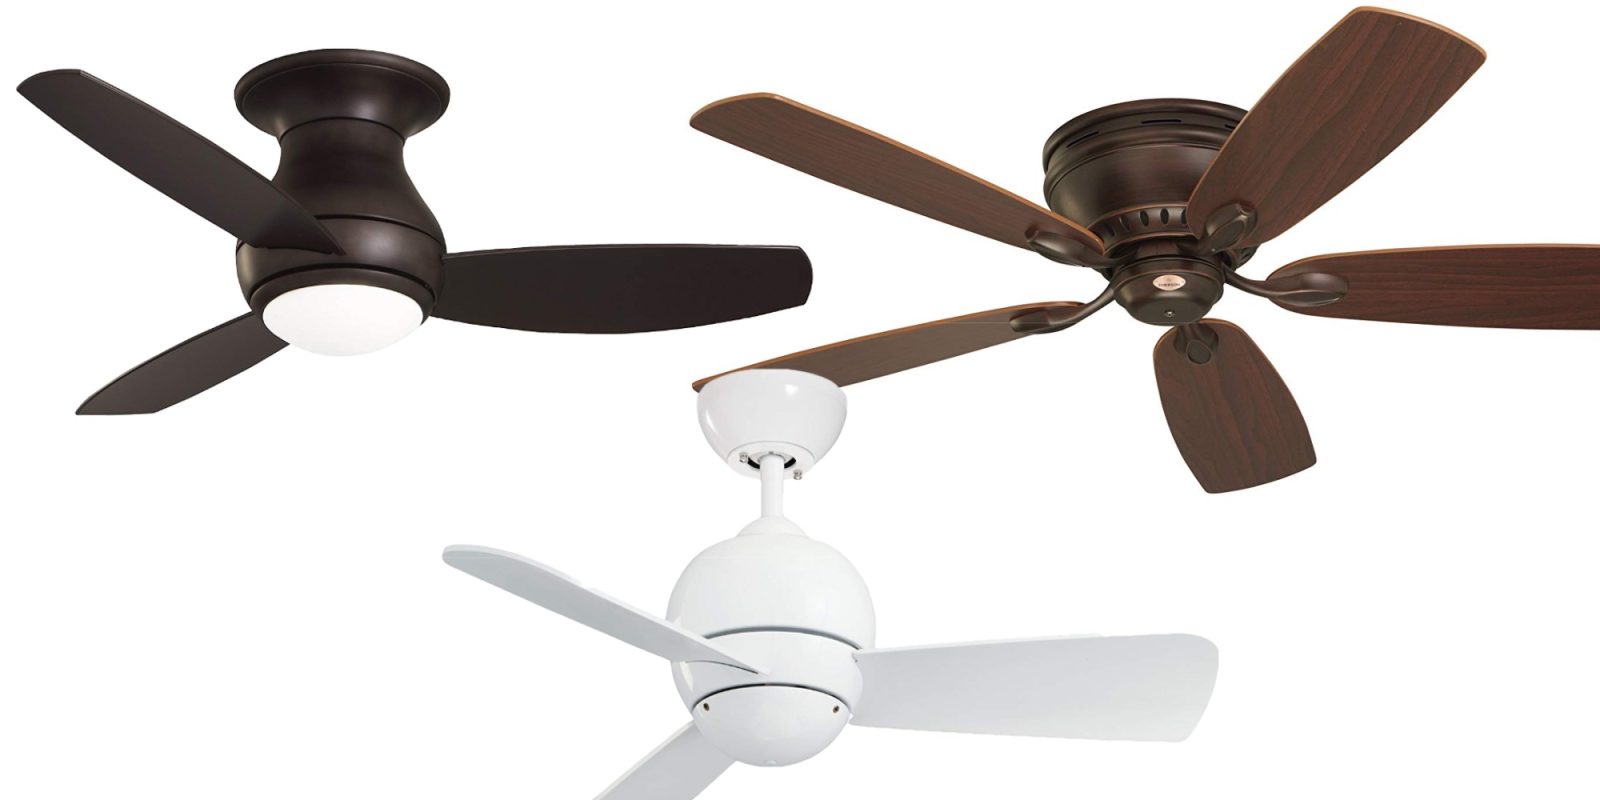 Save Up To 45 On Emerson Ceiling Fans From 31 Shipped In Today S